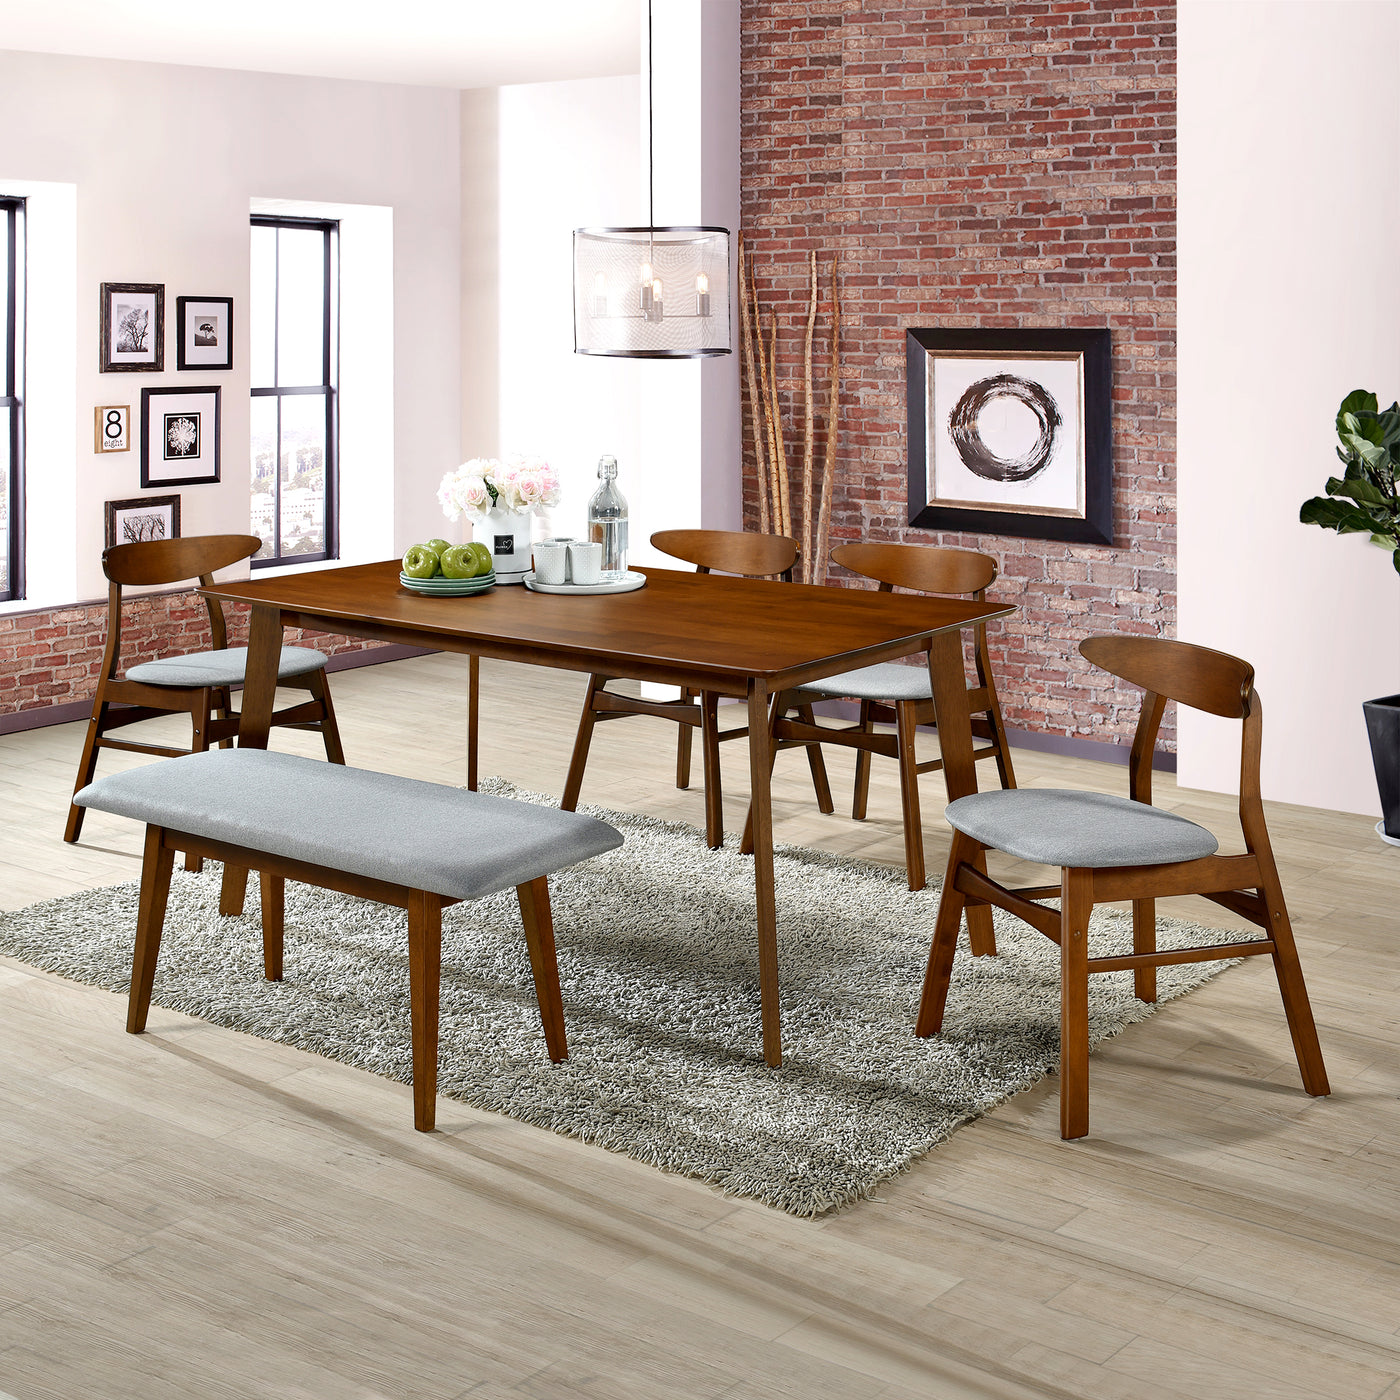 Lalia 6-Piece Solid Wood Upholstered Chair and Dining Table Bench Dining Set